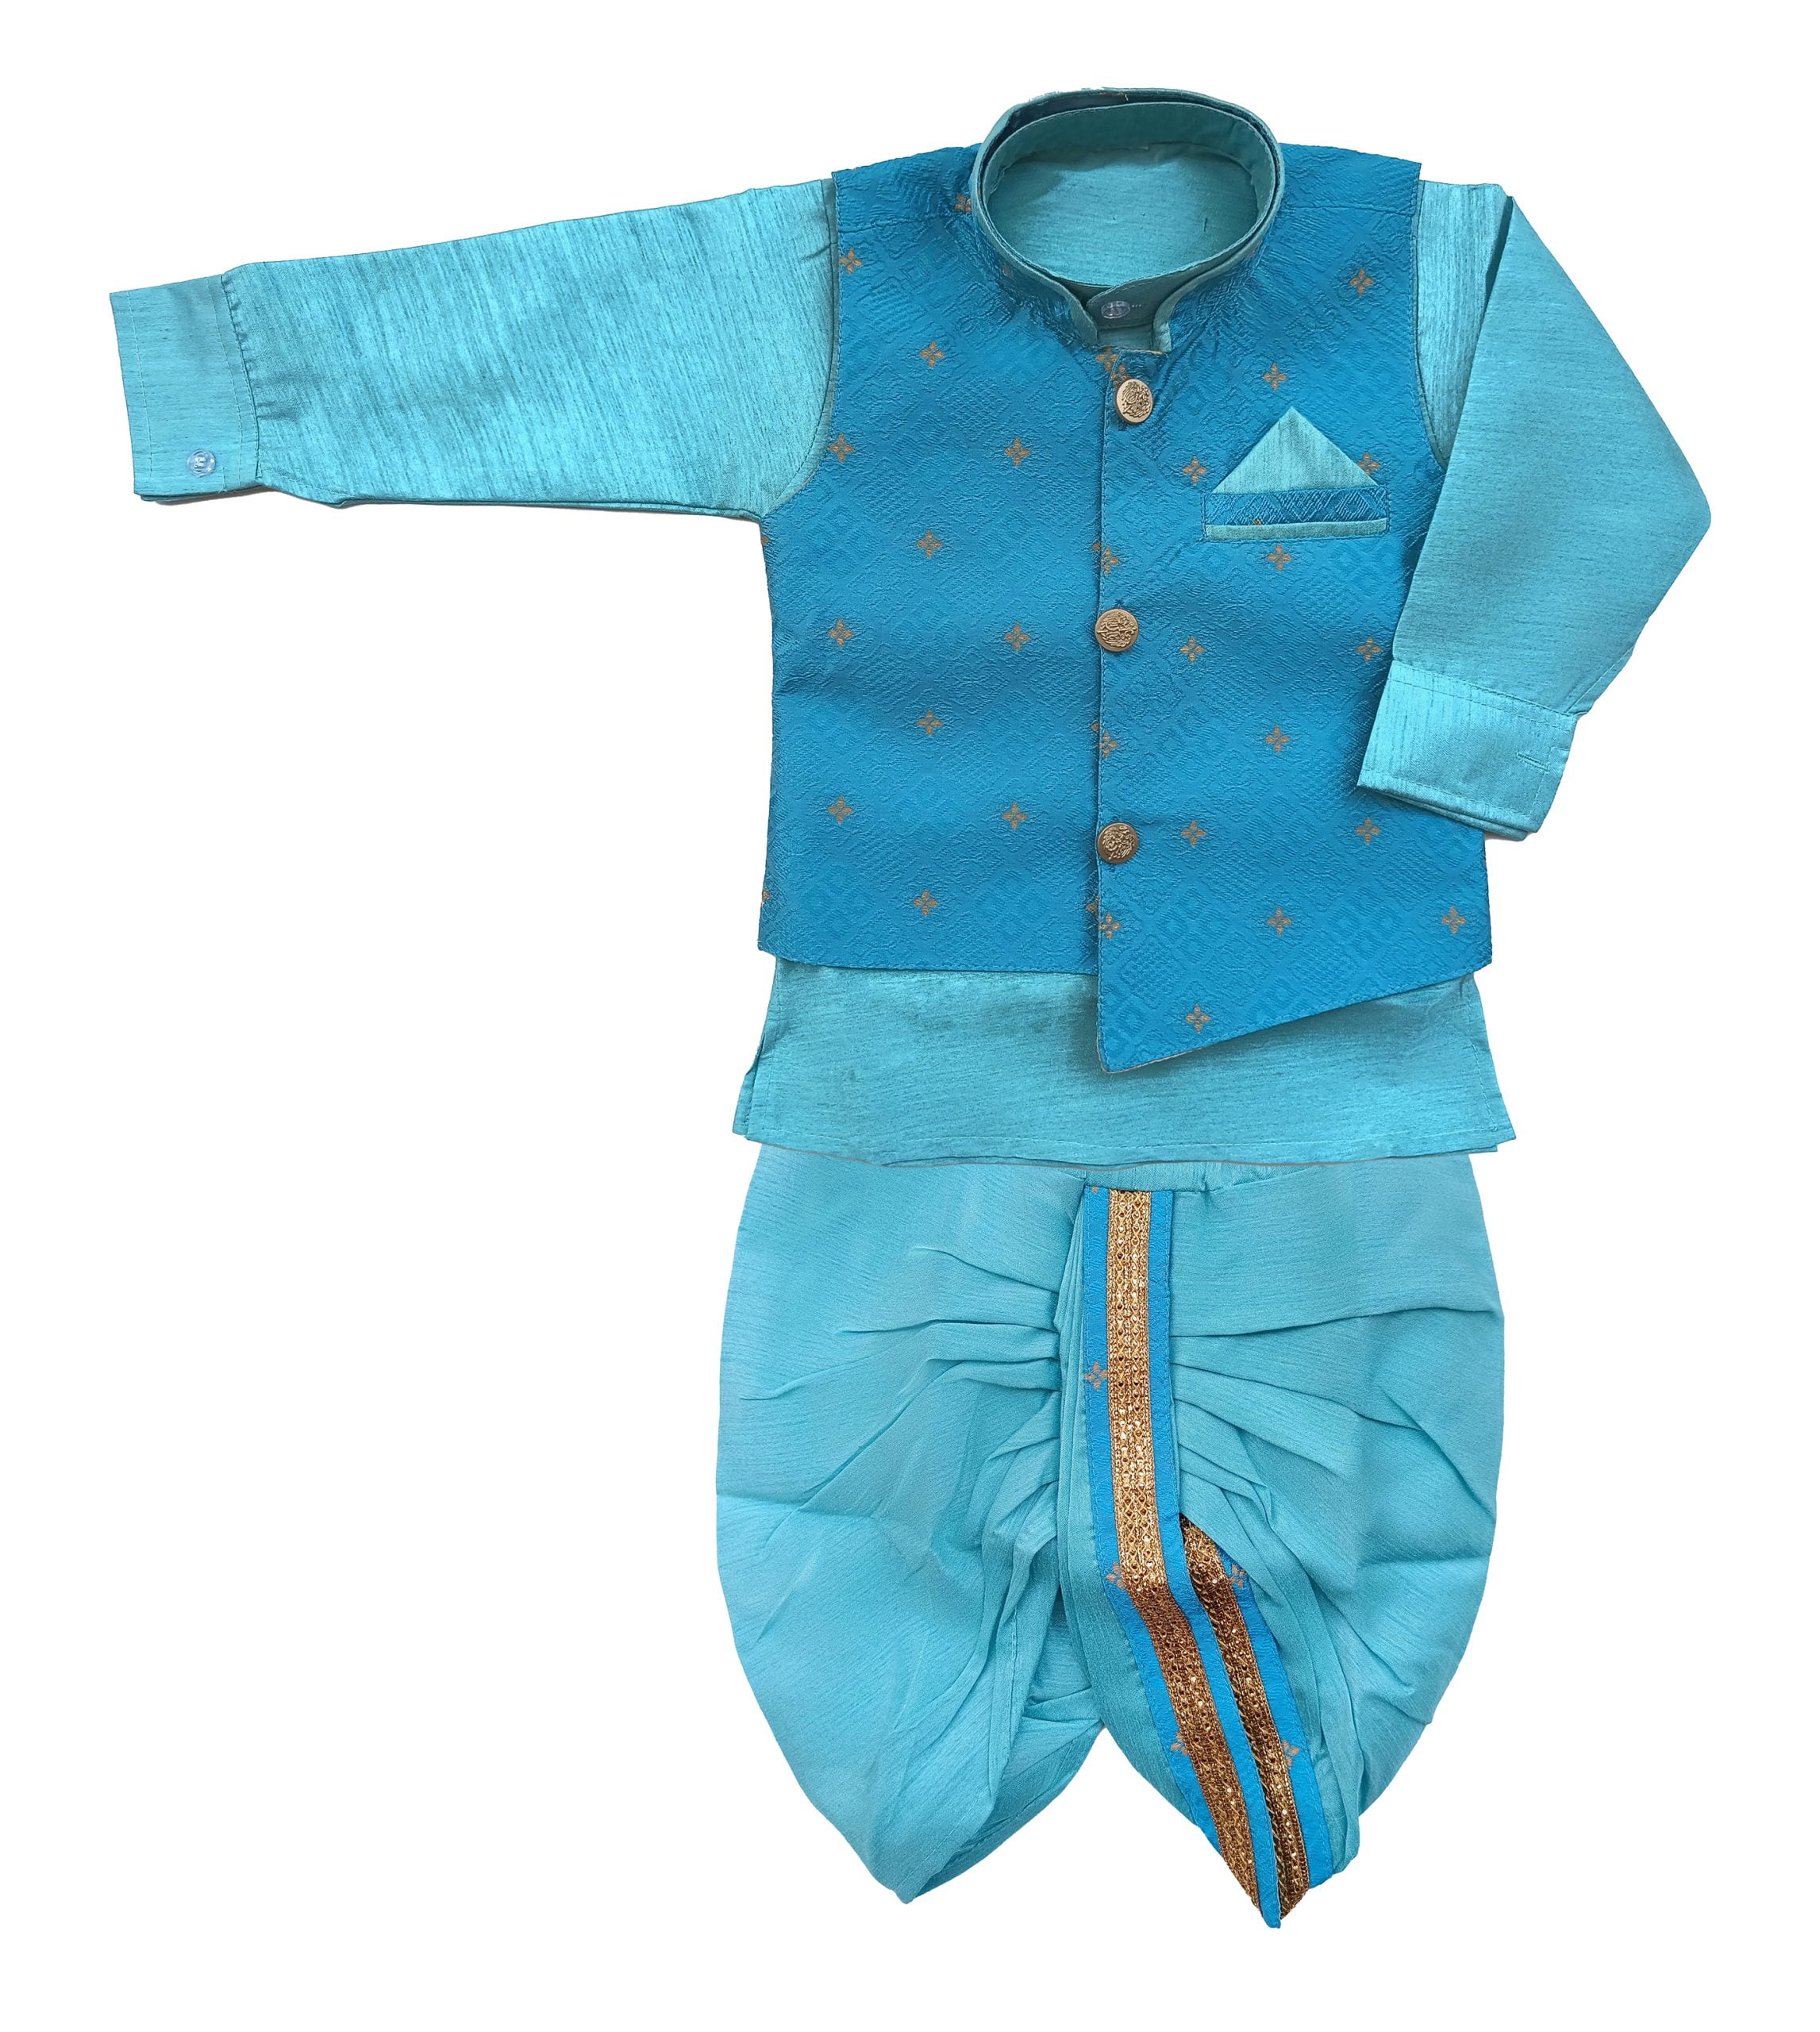 YALLET Toddler Baby Boy Clothes Suit Gentleman India | Ubuy